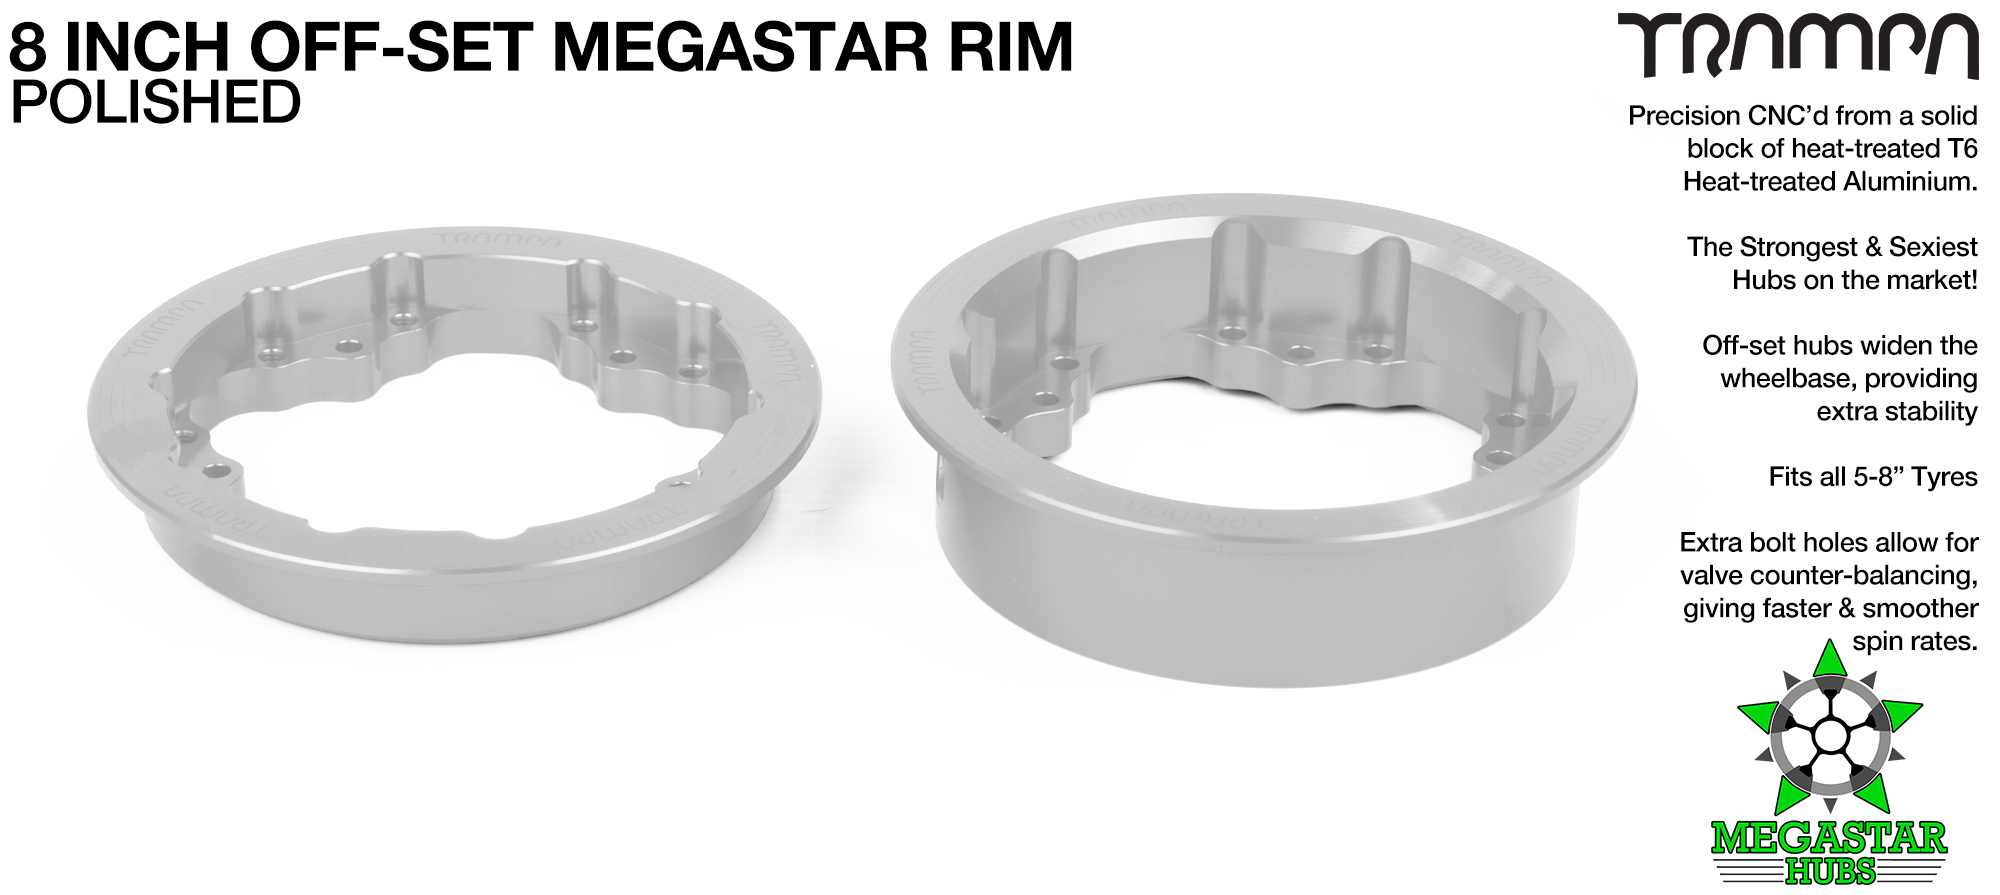 MEGASTAR 8 OS Rims Measure 3.75 x 2 Inch. The bearings are positioned OFF-SET widening the wheel base & accept all 3.75 Rim Tyres - SILVER